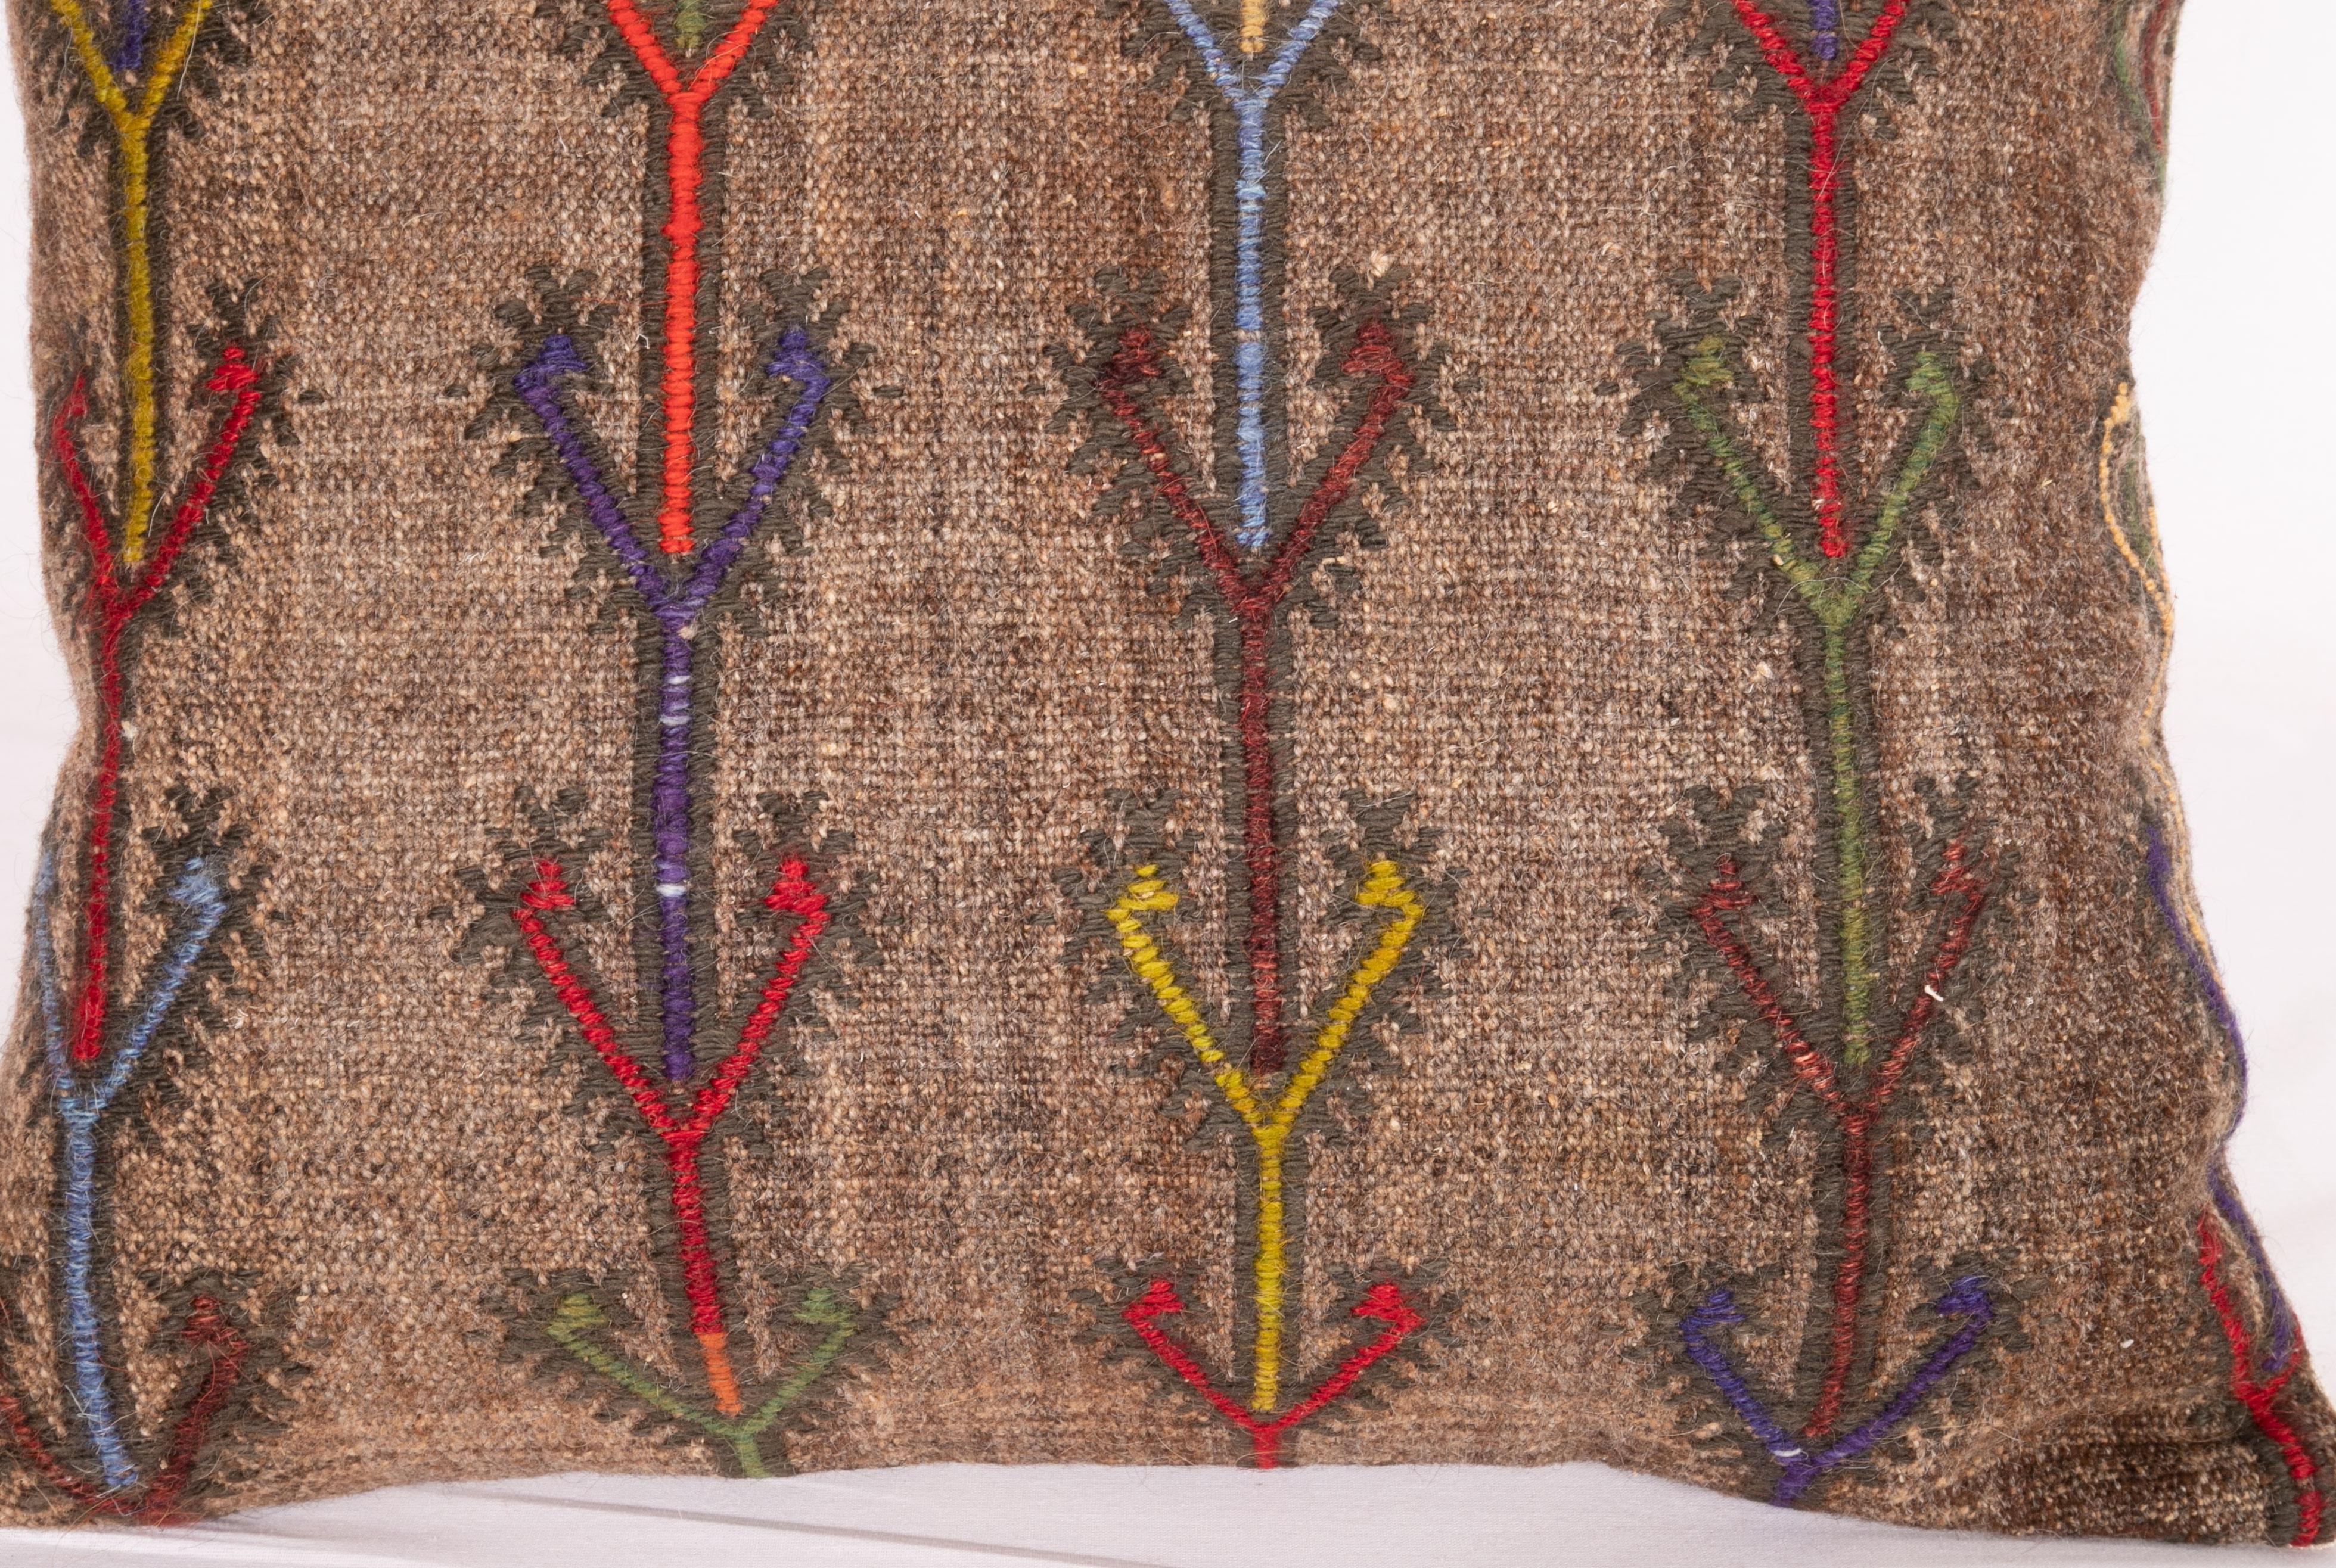 Hand-Woven Wool Cicim Pillow Case Made from an Anatolian Cicim Kilim, Mid-20th Century For Sale